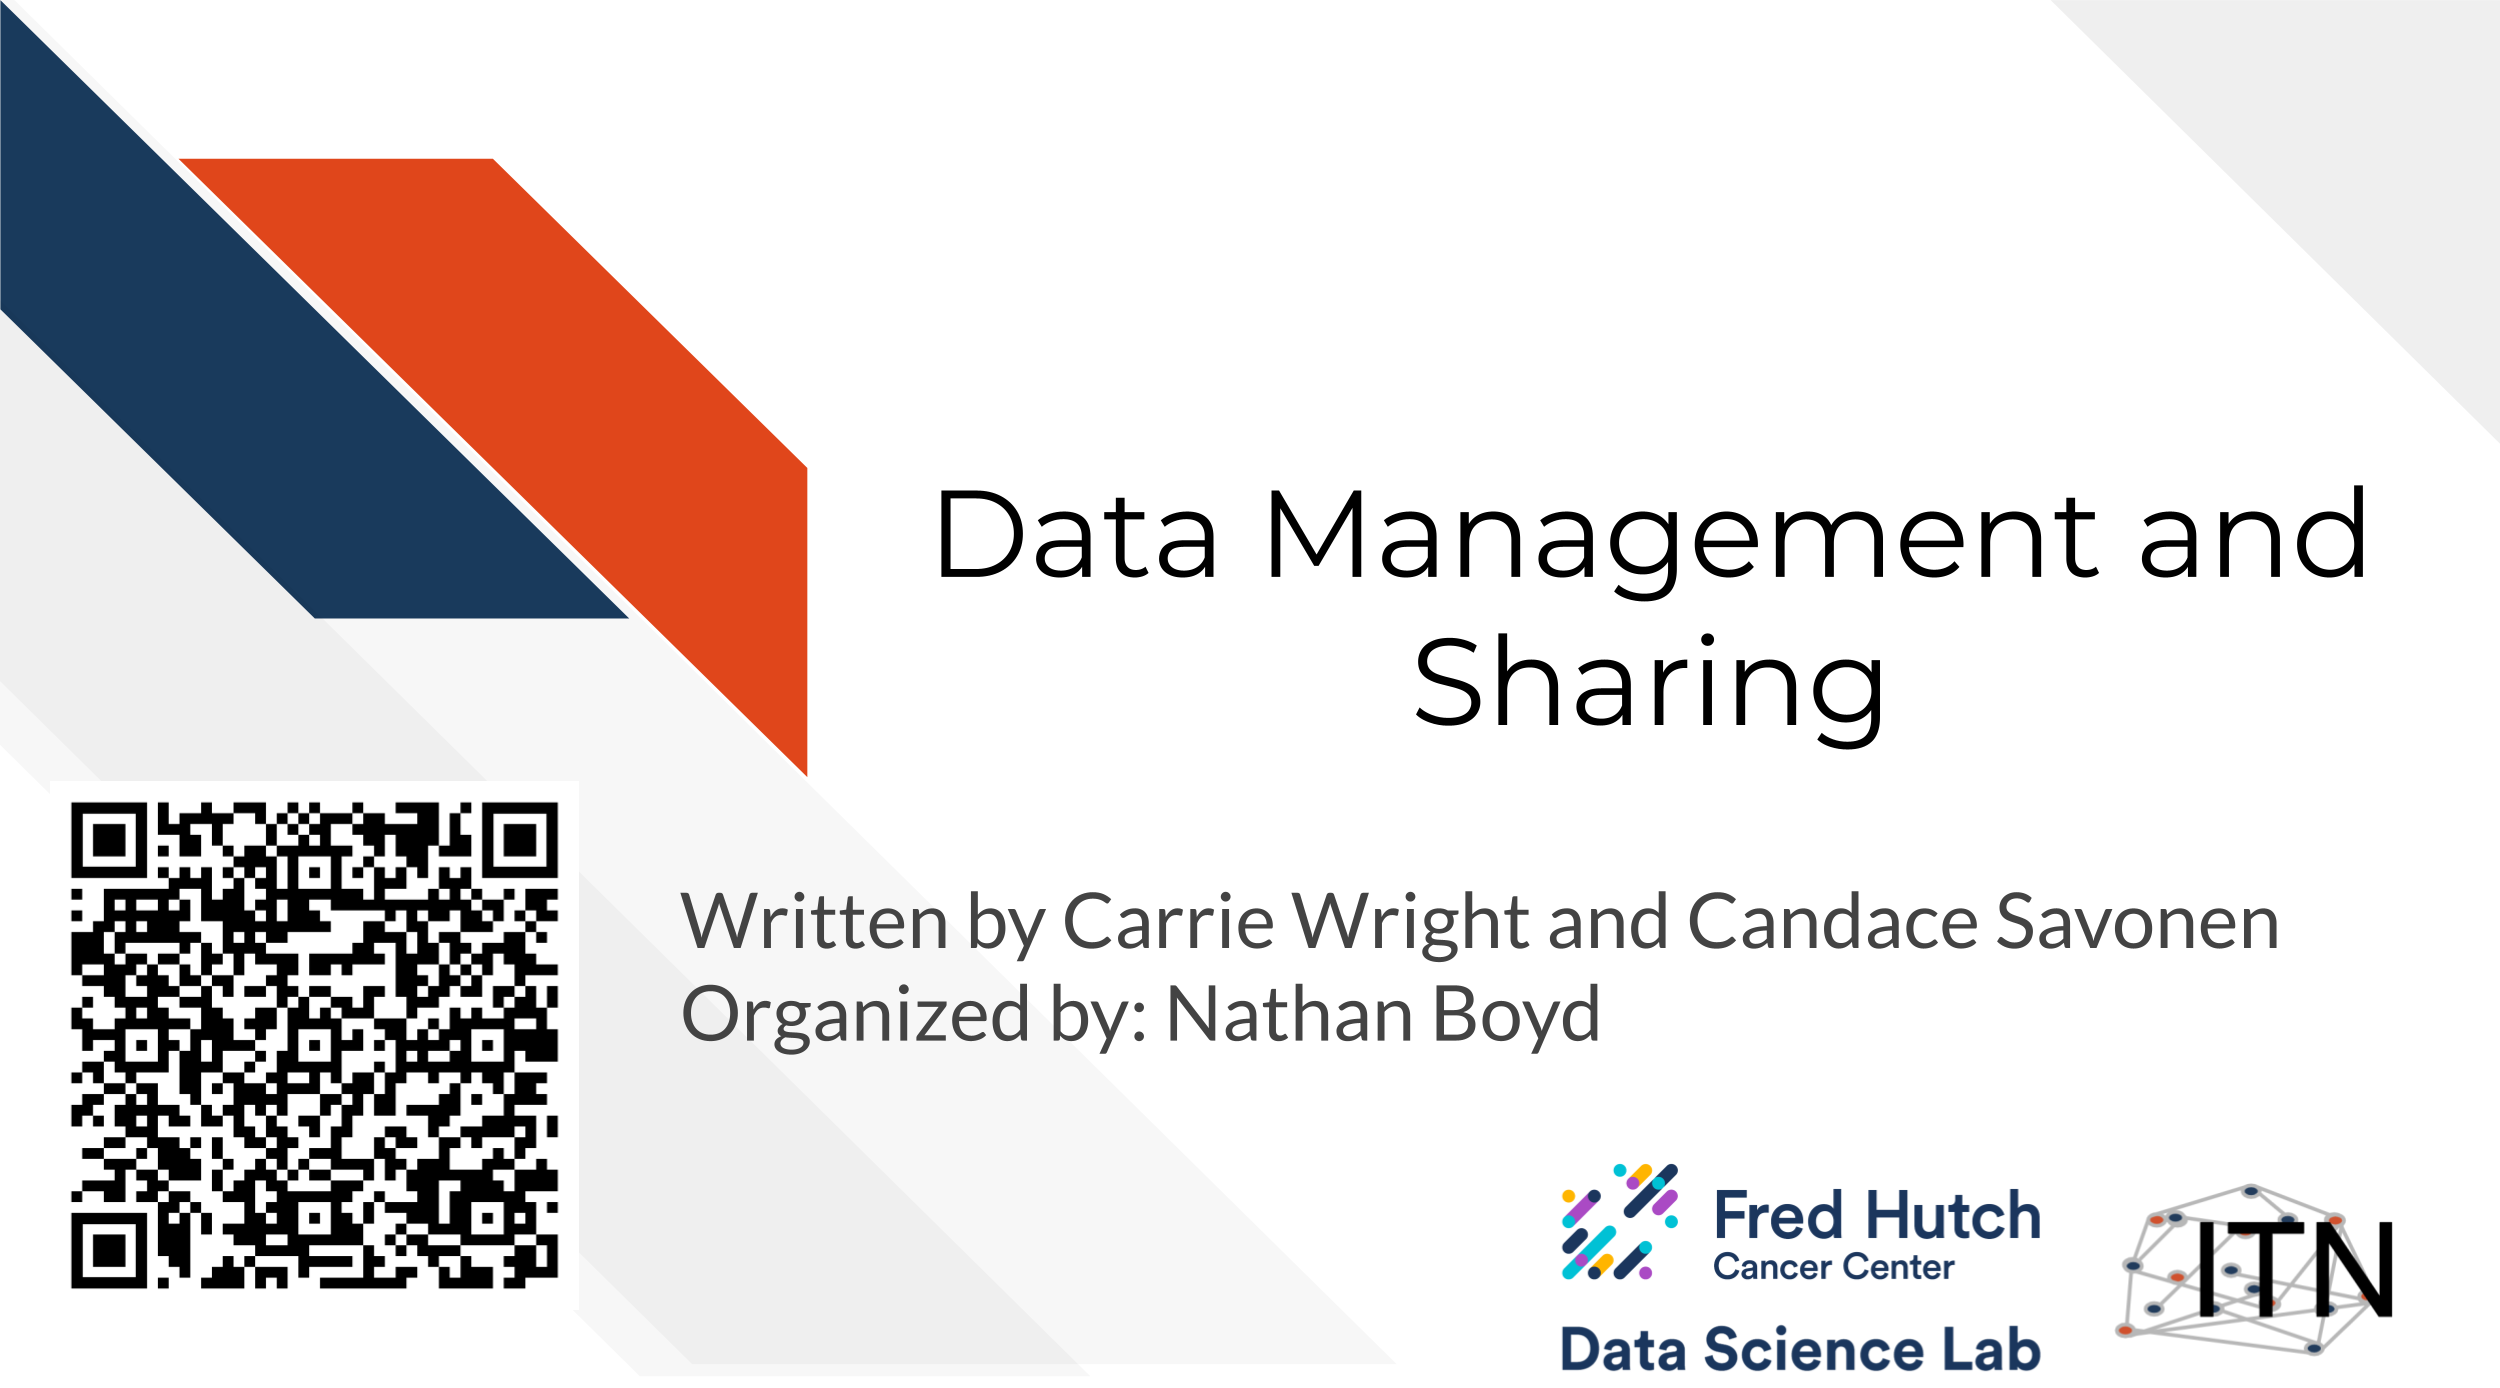 Data Management and Sharing, written by Carrie Wright and Candace Savonen